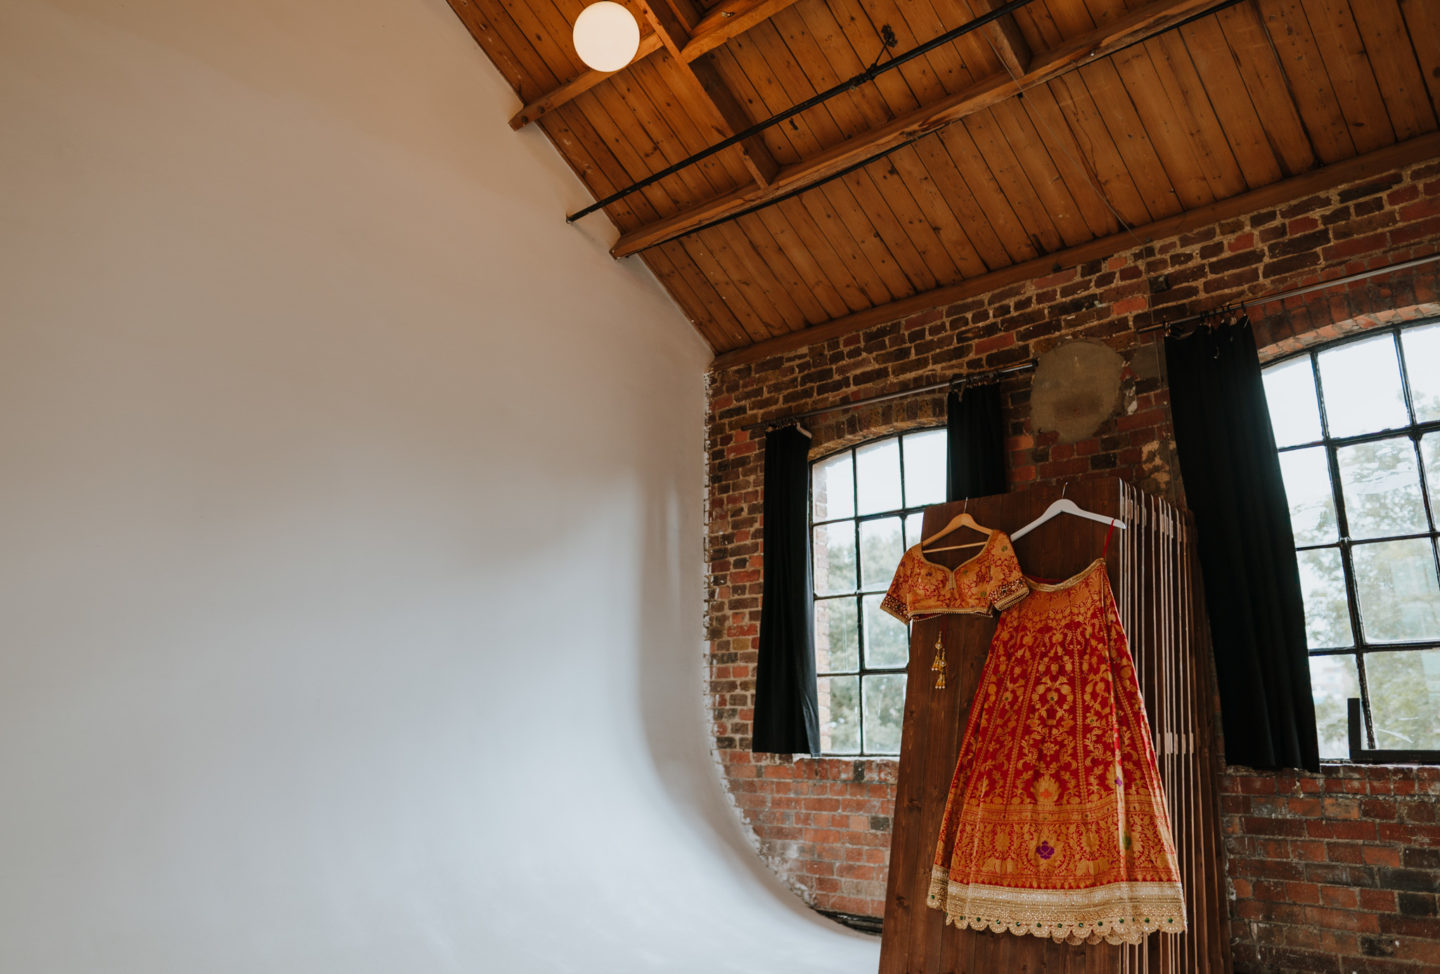 Multicultural Two Day Wedding With Traditional Indian Dress In West London